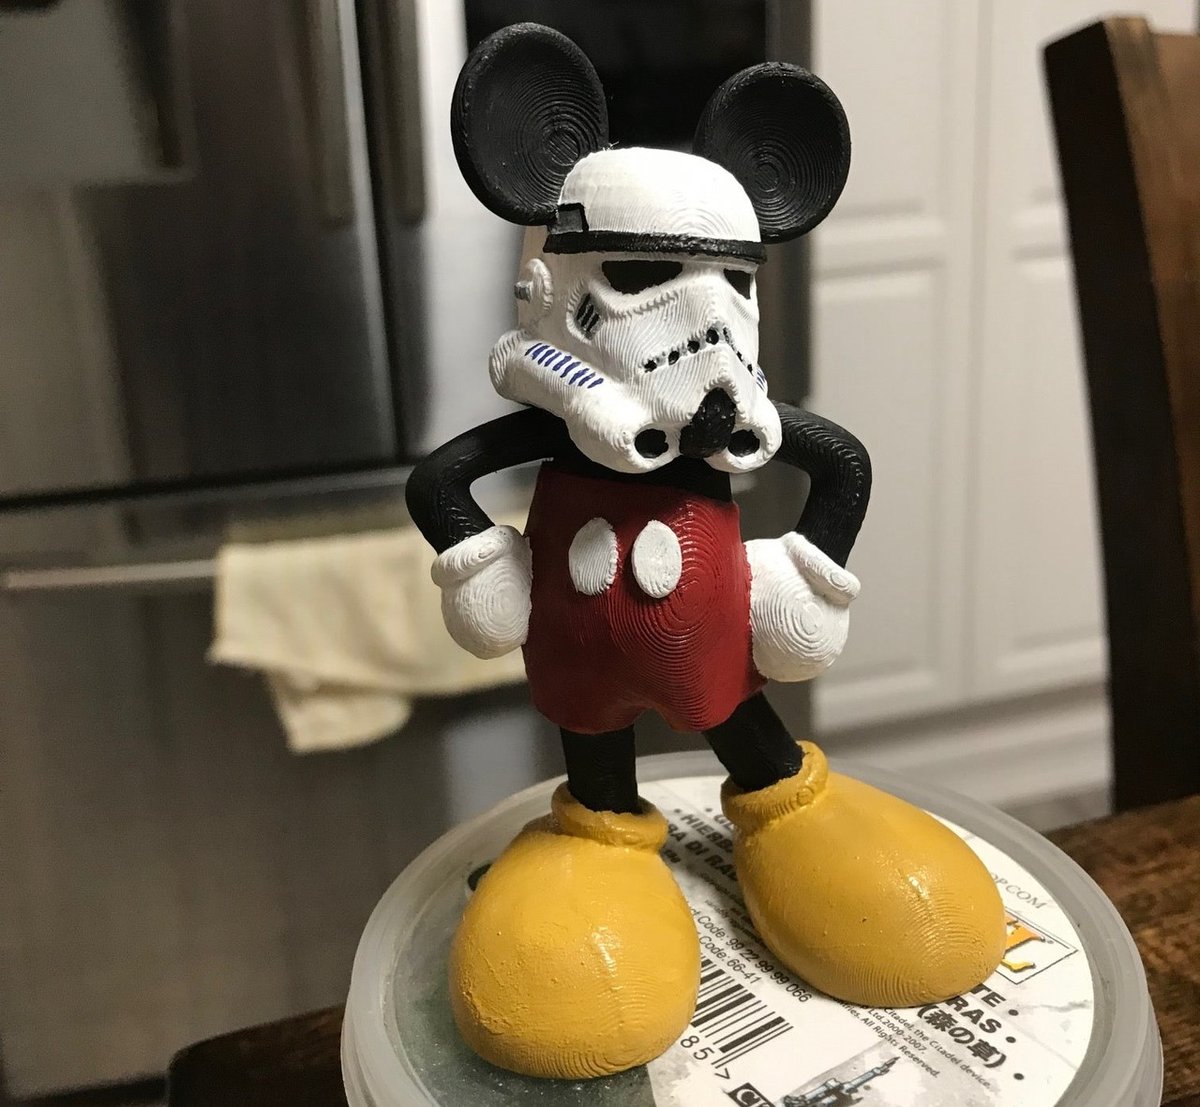 Netflix's pathetic rebellion will be crushed with the help of this adorable Storm trooper Mickey